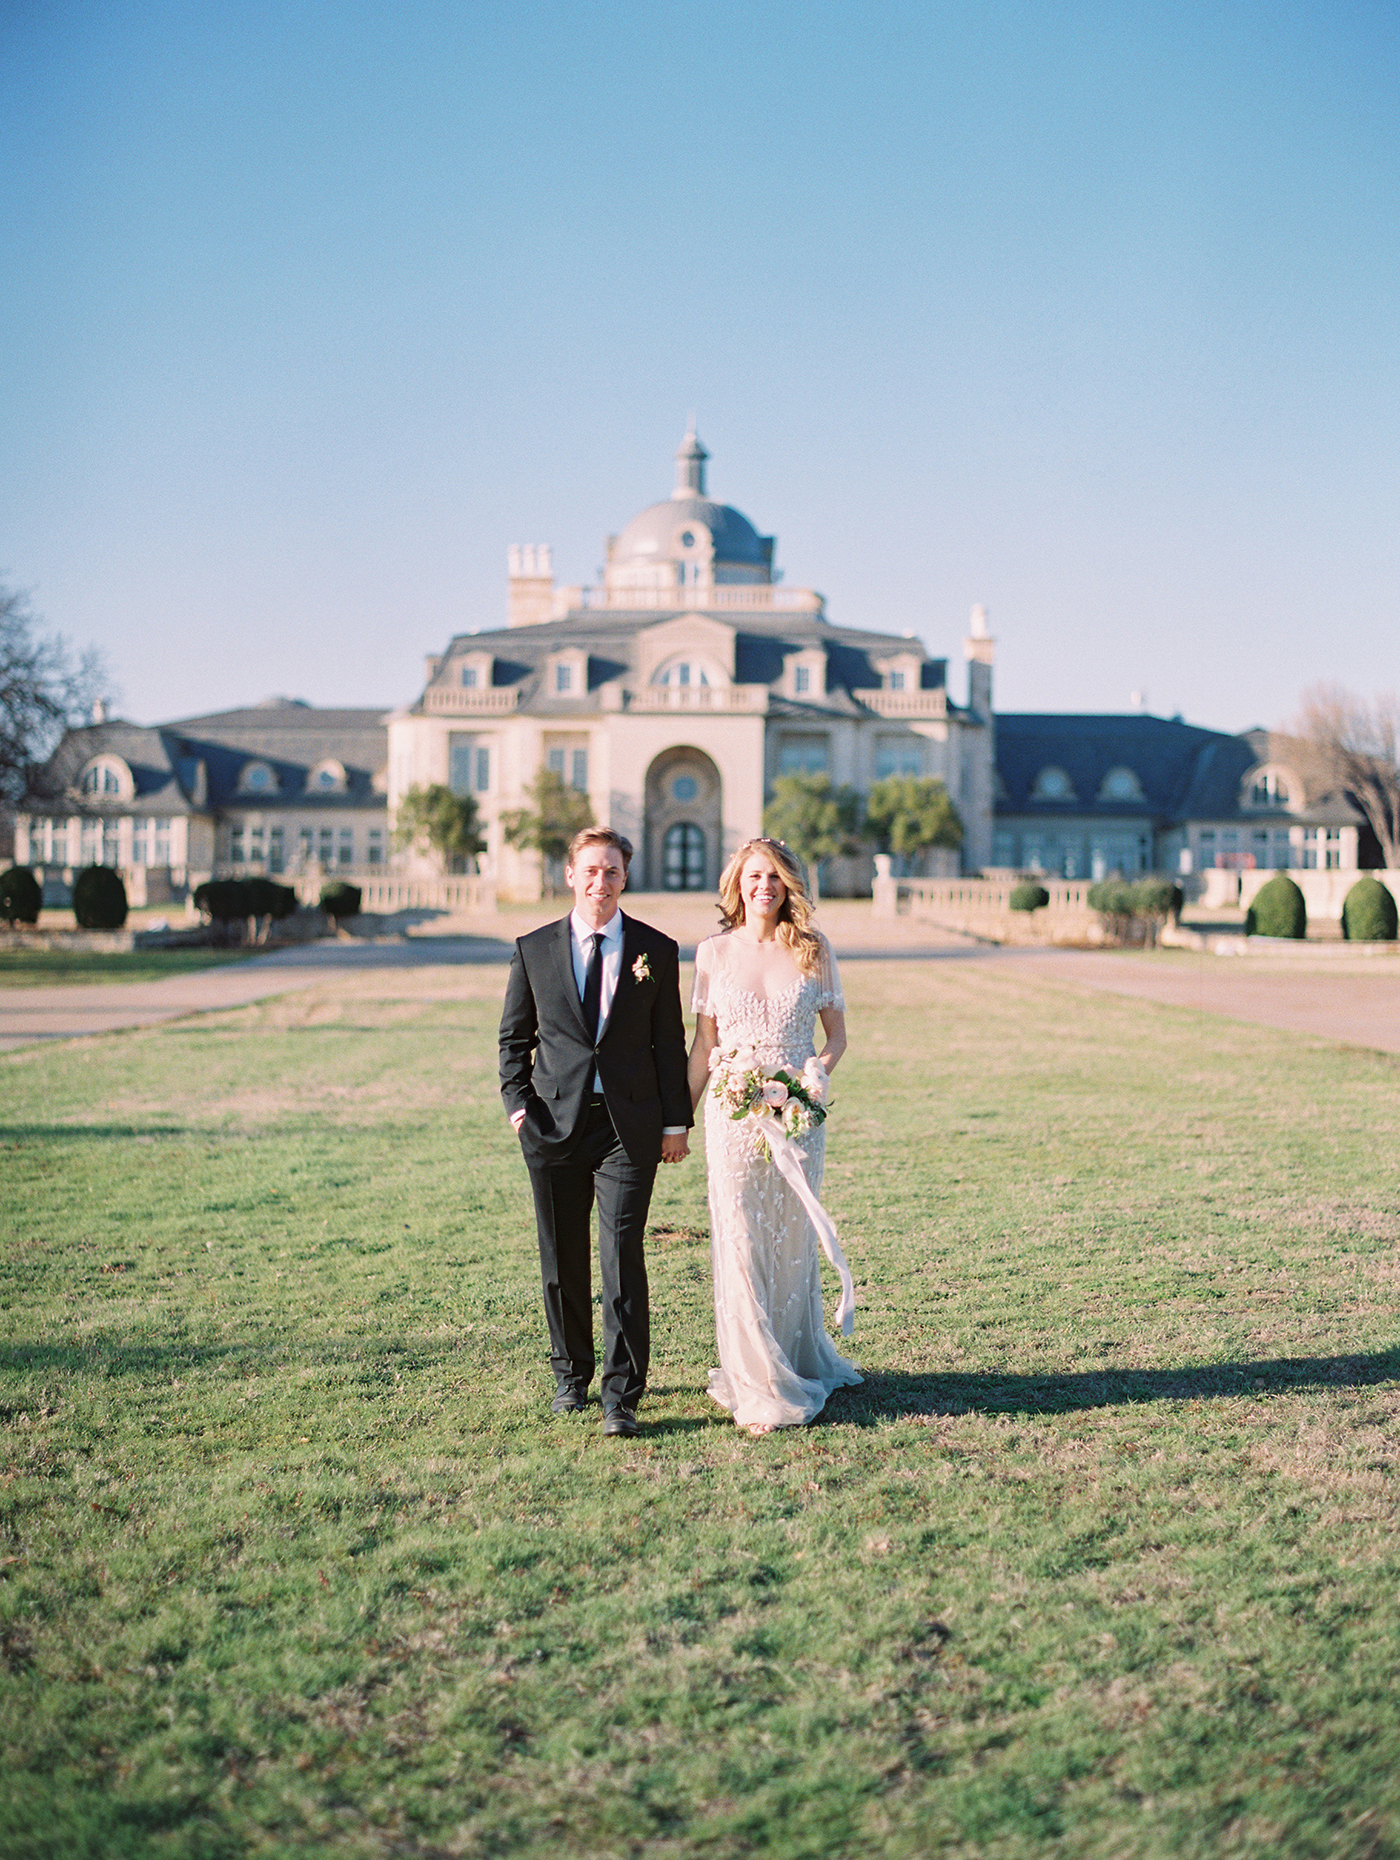 Dallas Wedding Inspiration: Abloom Editorial at The Olana in Dallas Texas | Designed by Allora & Ivy Event Co.